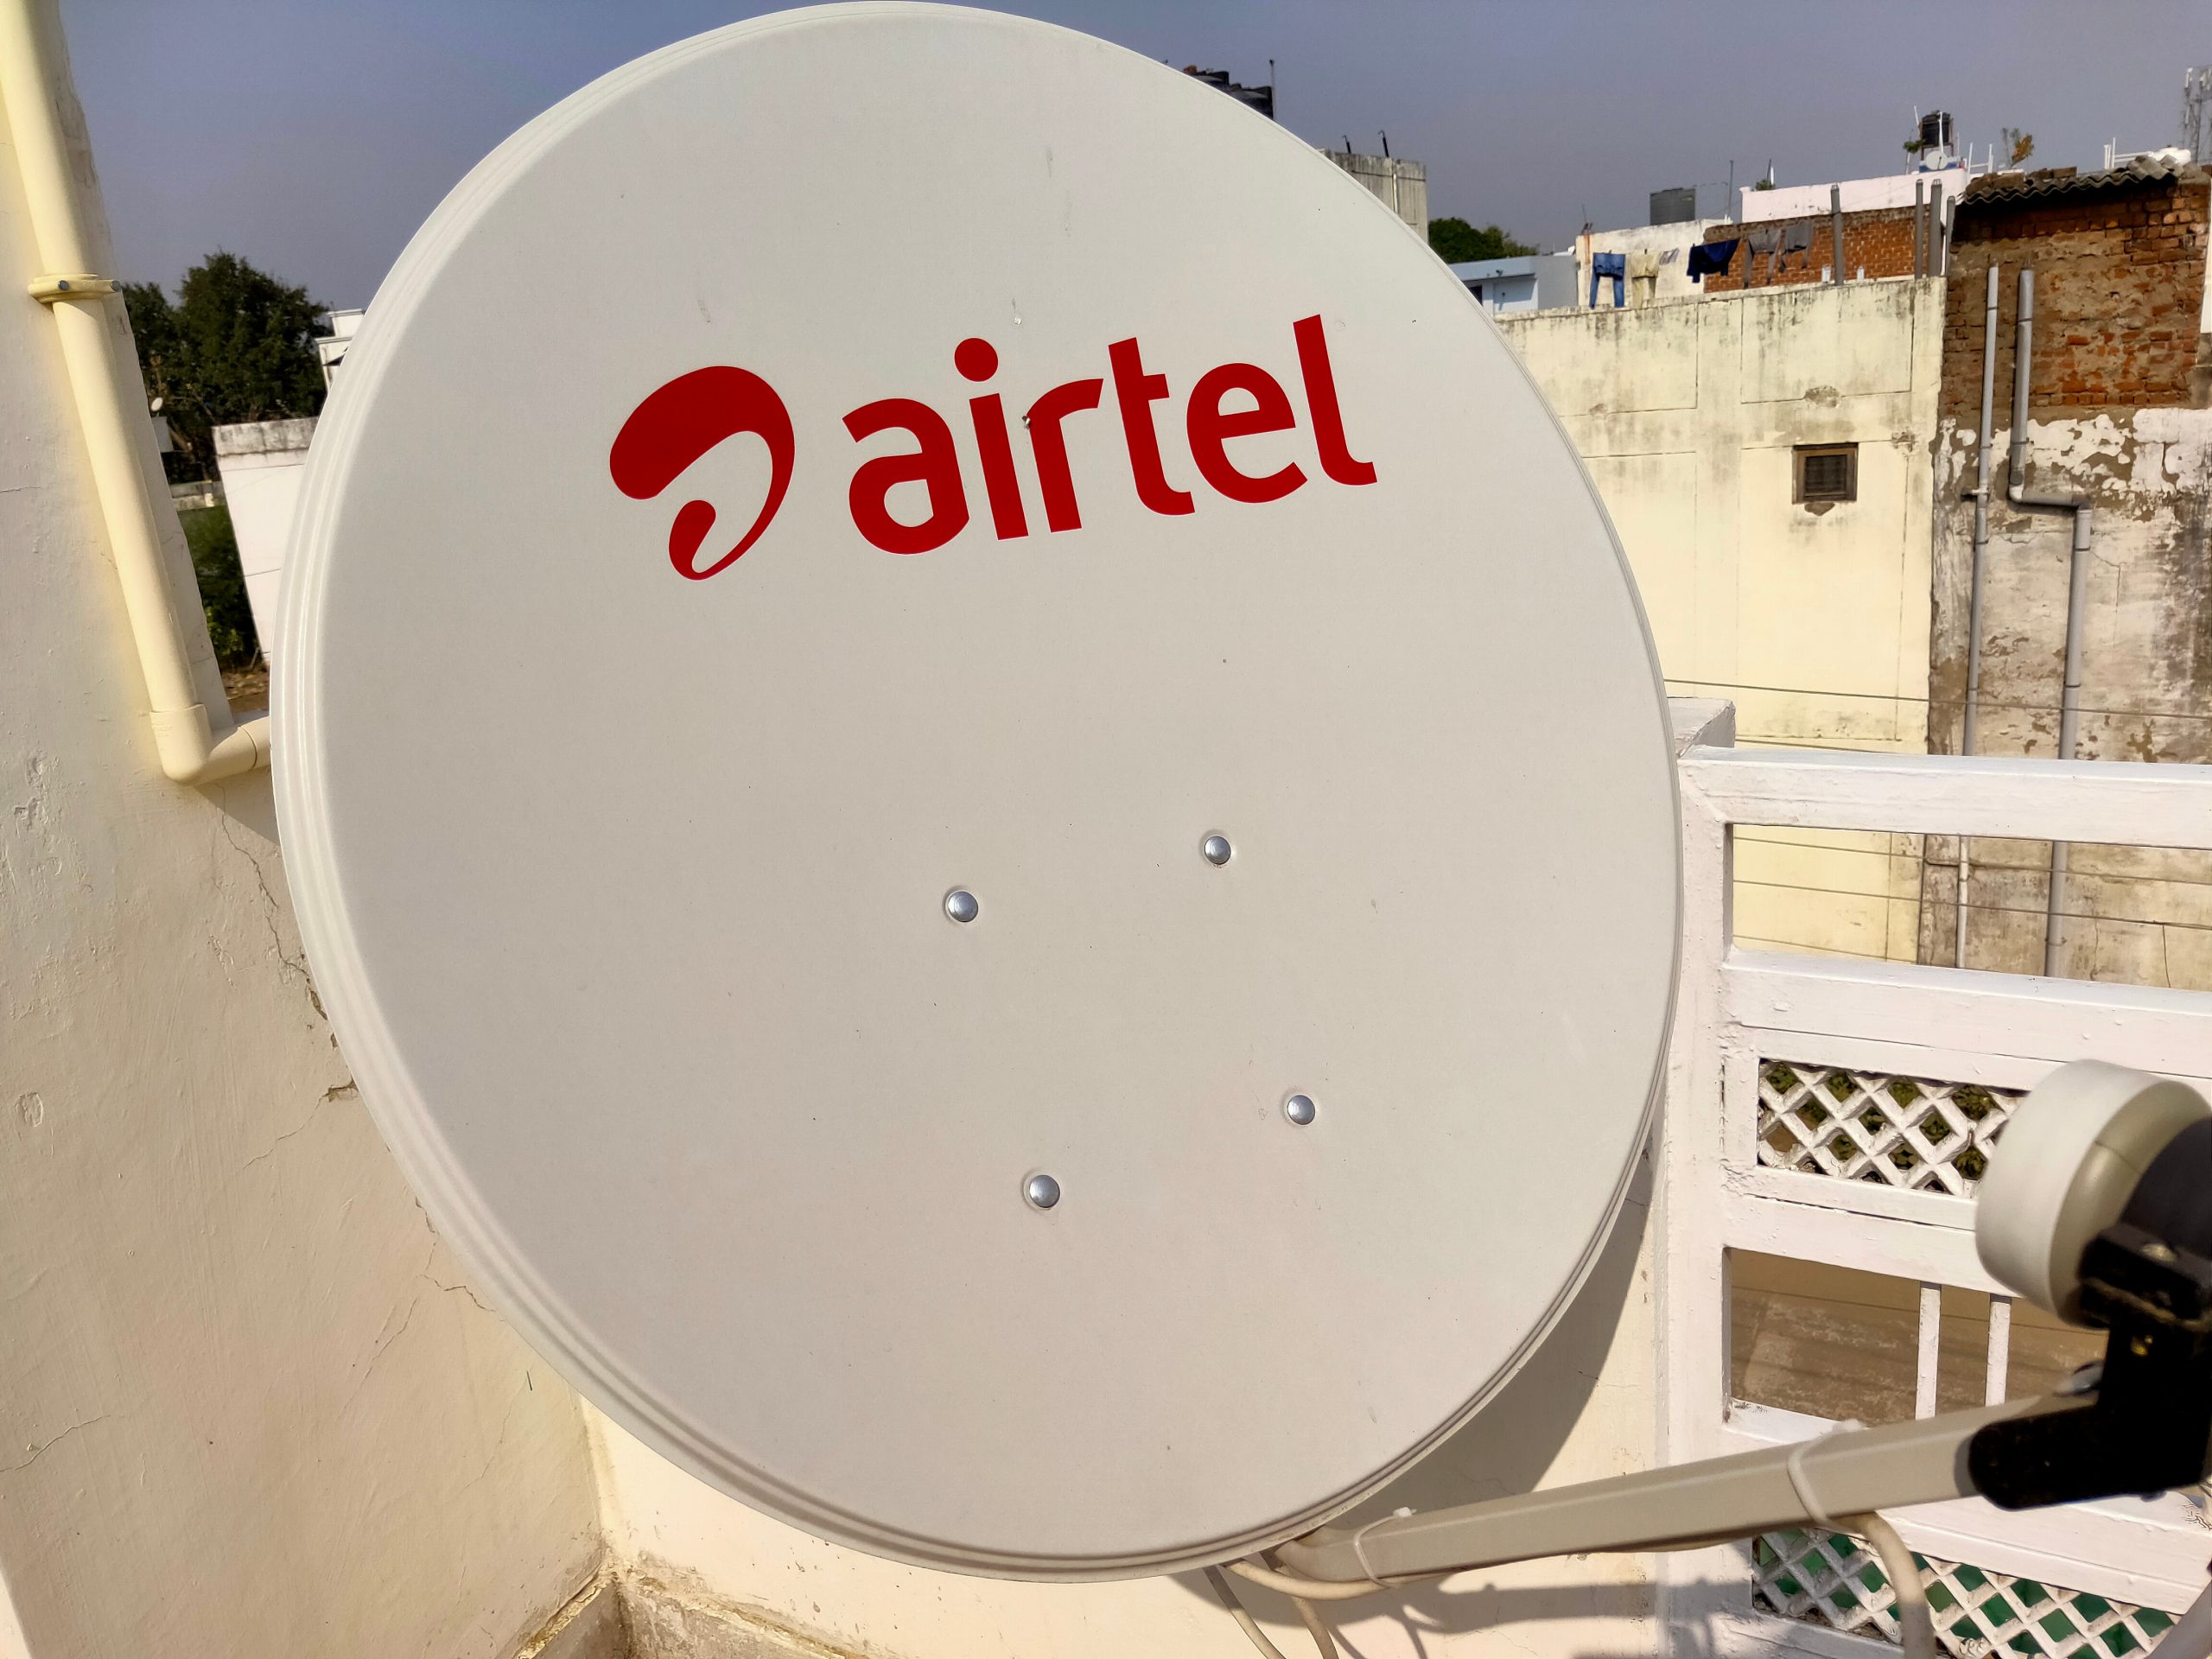 List of Airtel DTH Channel Numbers with Price - Airtel